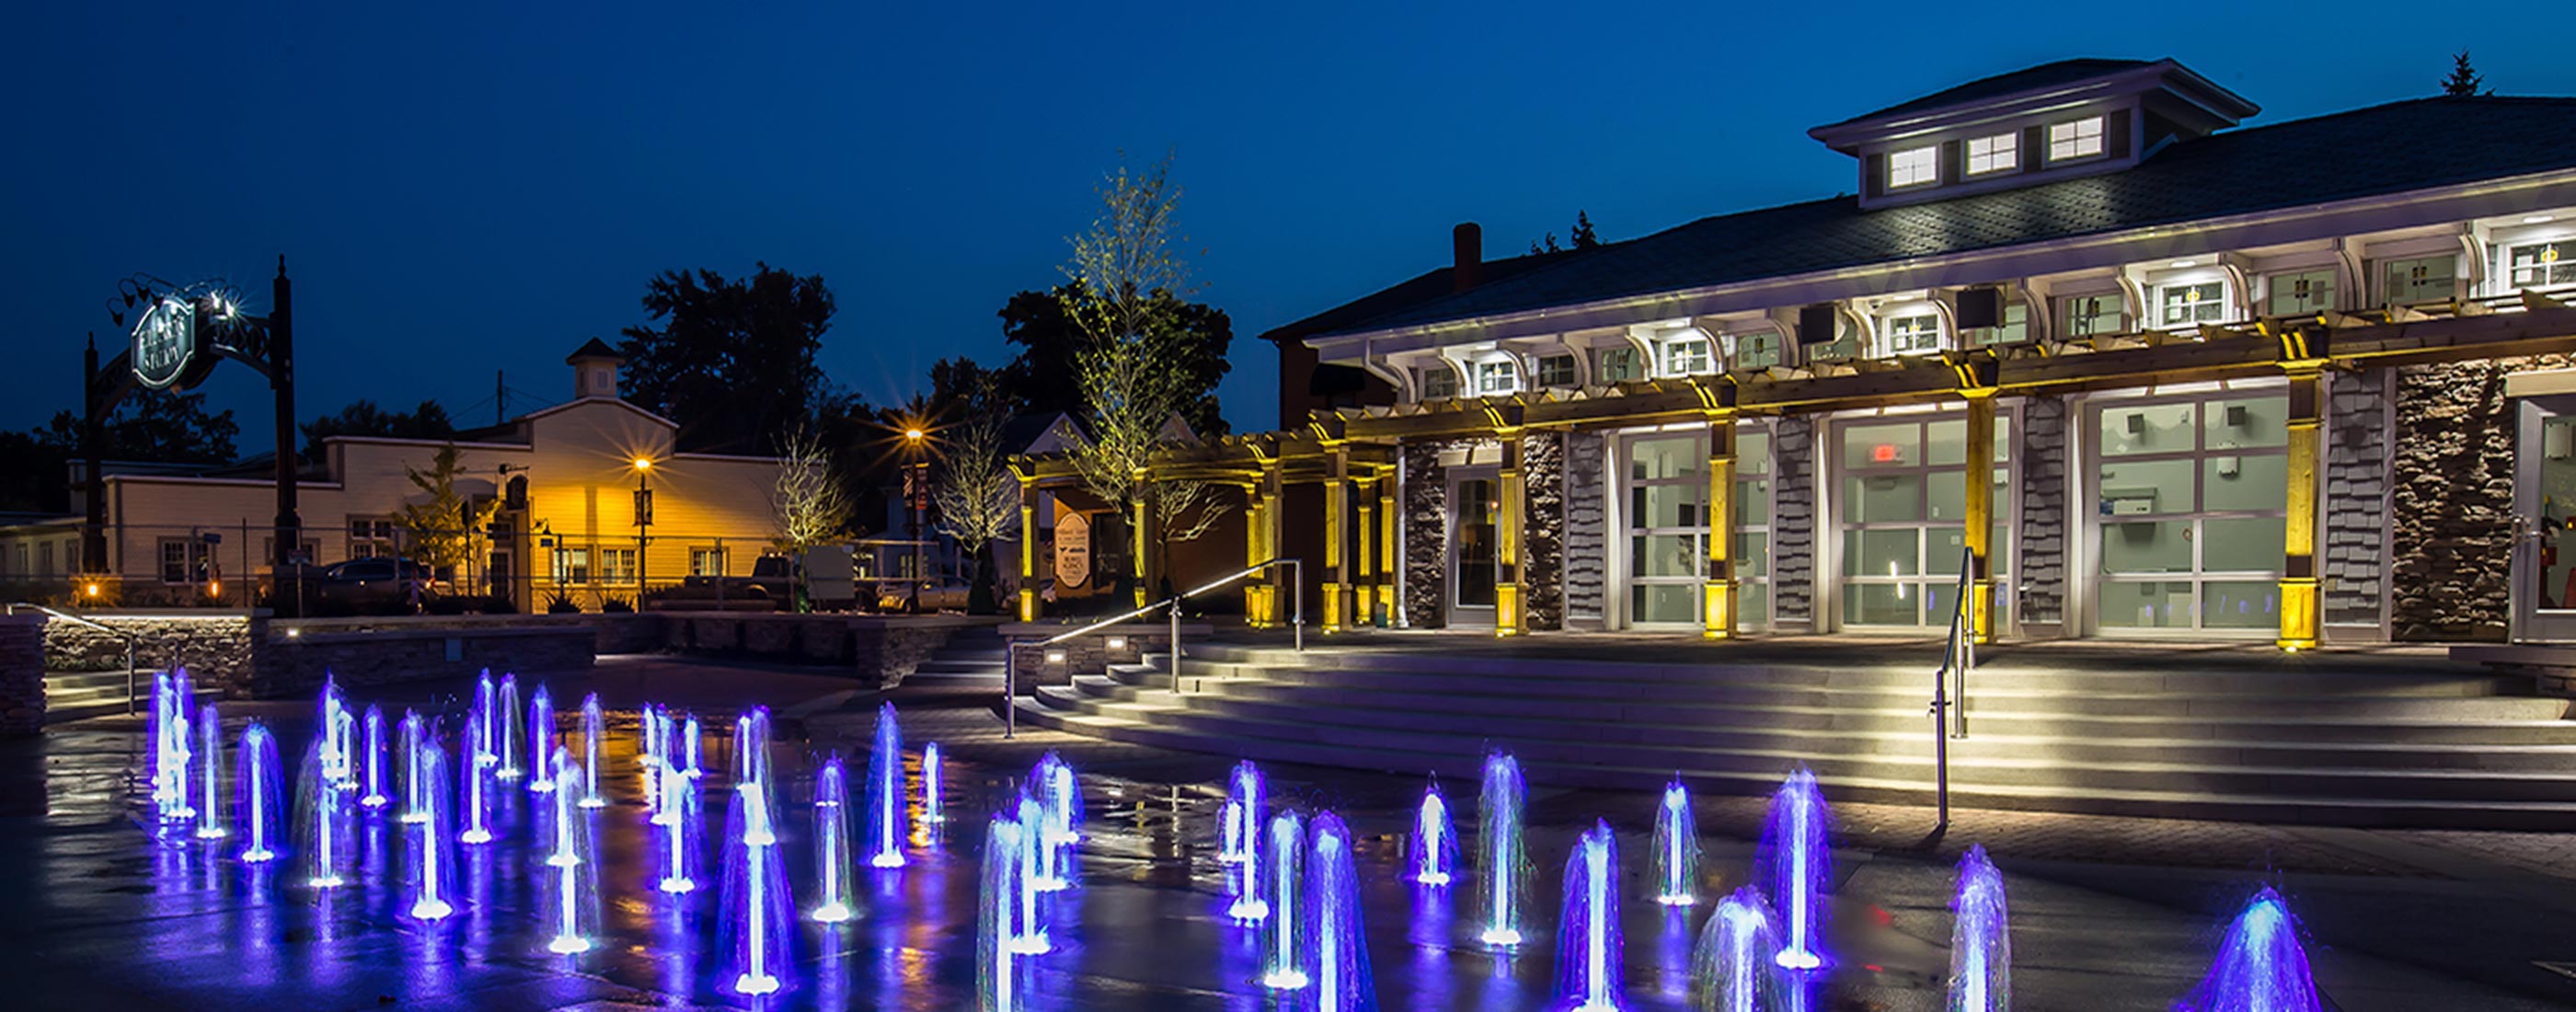 Hilliard, Ohio’s First Responders Park includes a plaza that lights up at night.